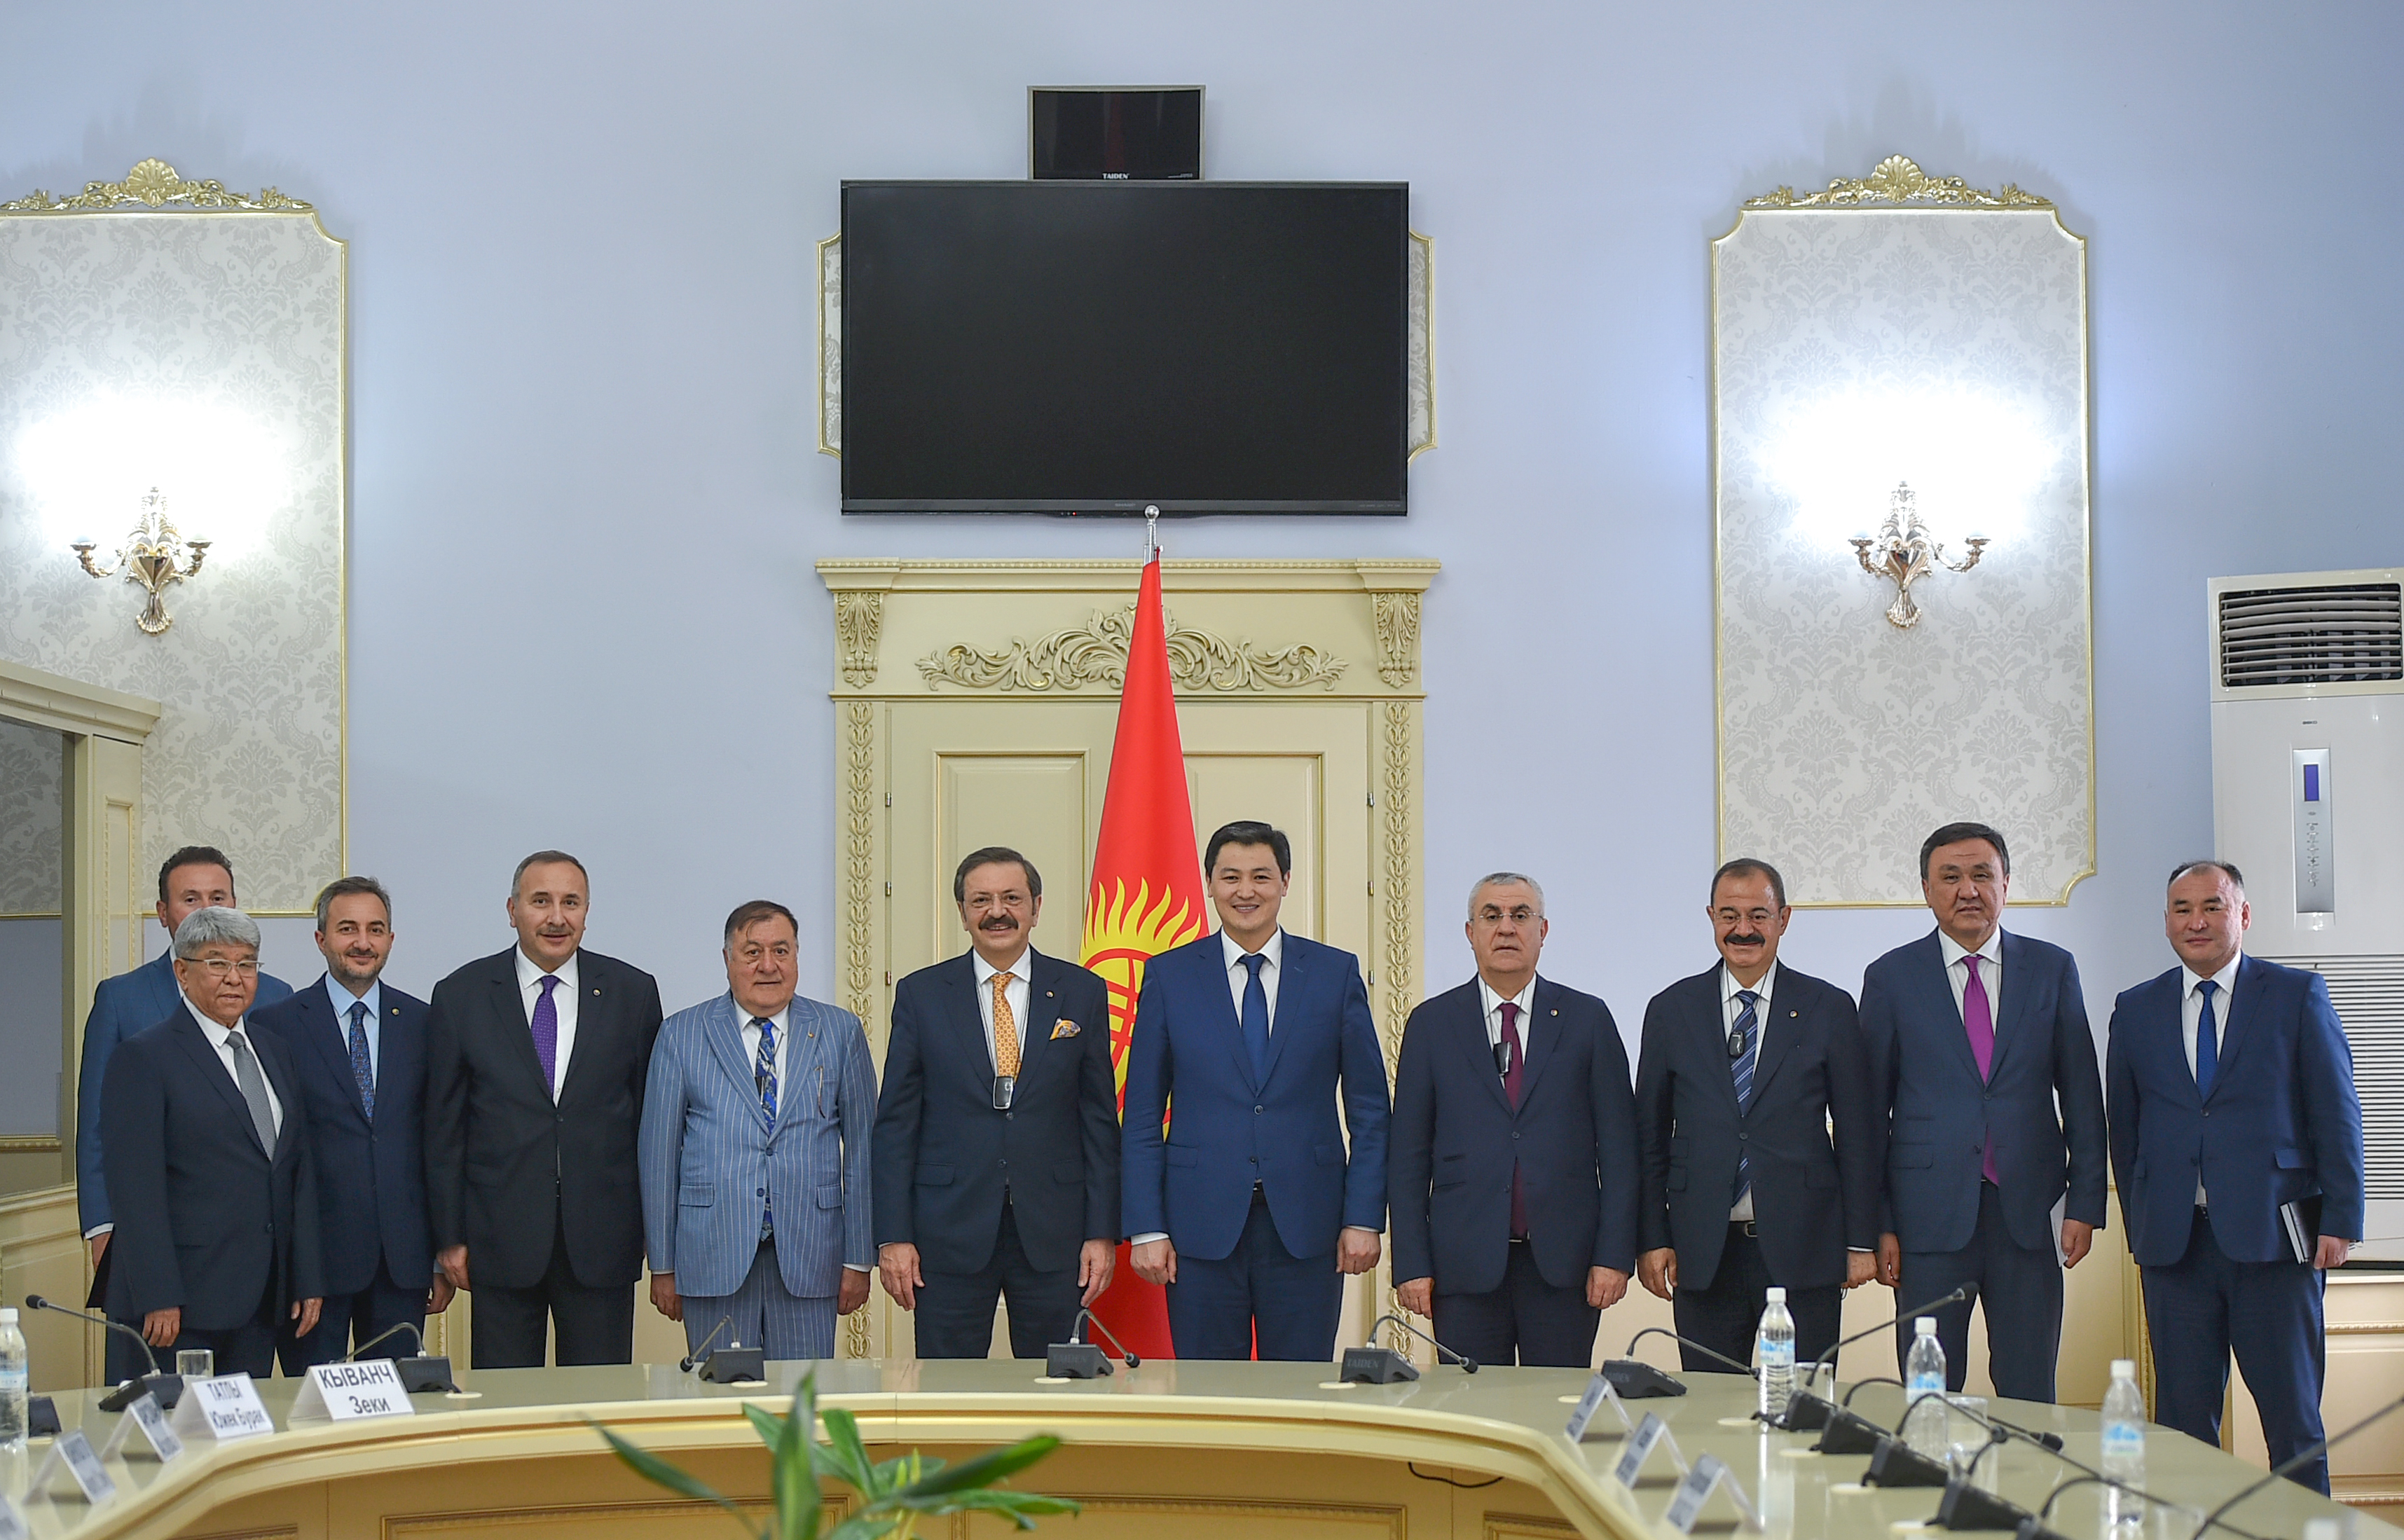 15.05.2021 With the Chairman of the Cabinet of Ministers of the Kyrgyz Republic Ulukbek Maripov and a delegation from Turkey 